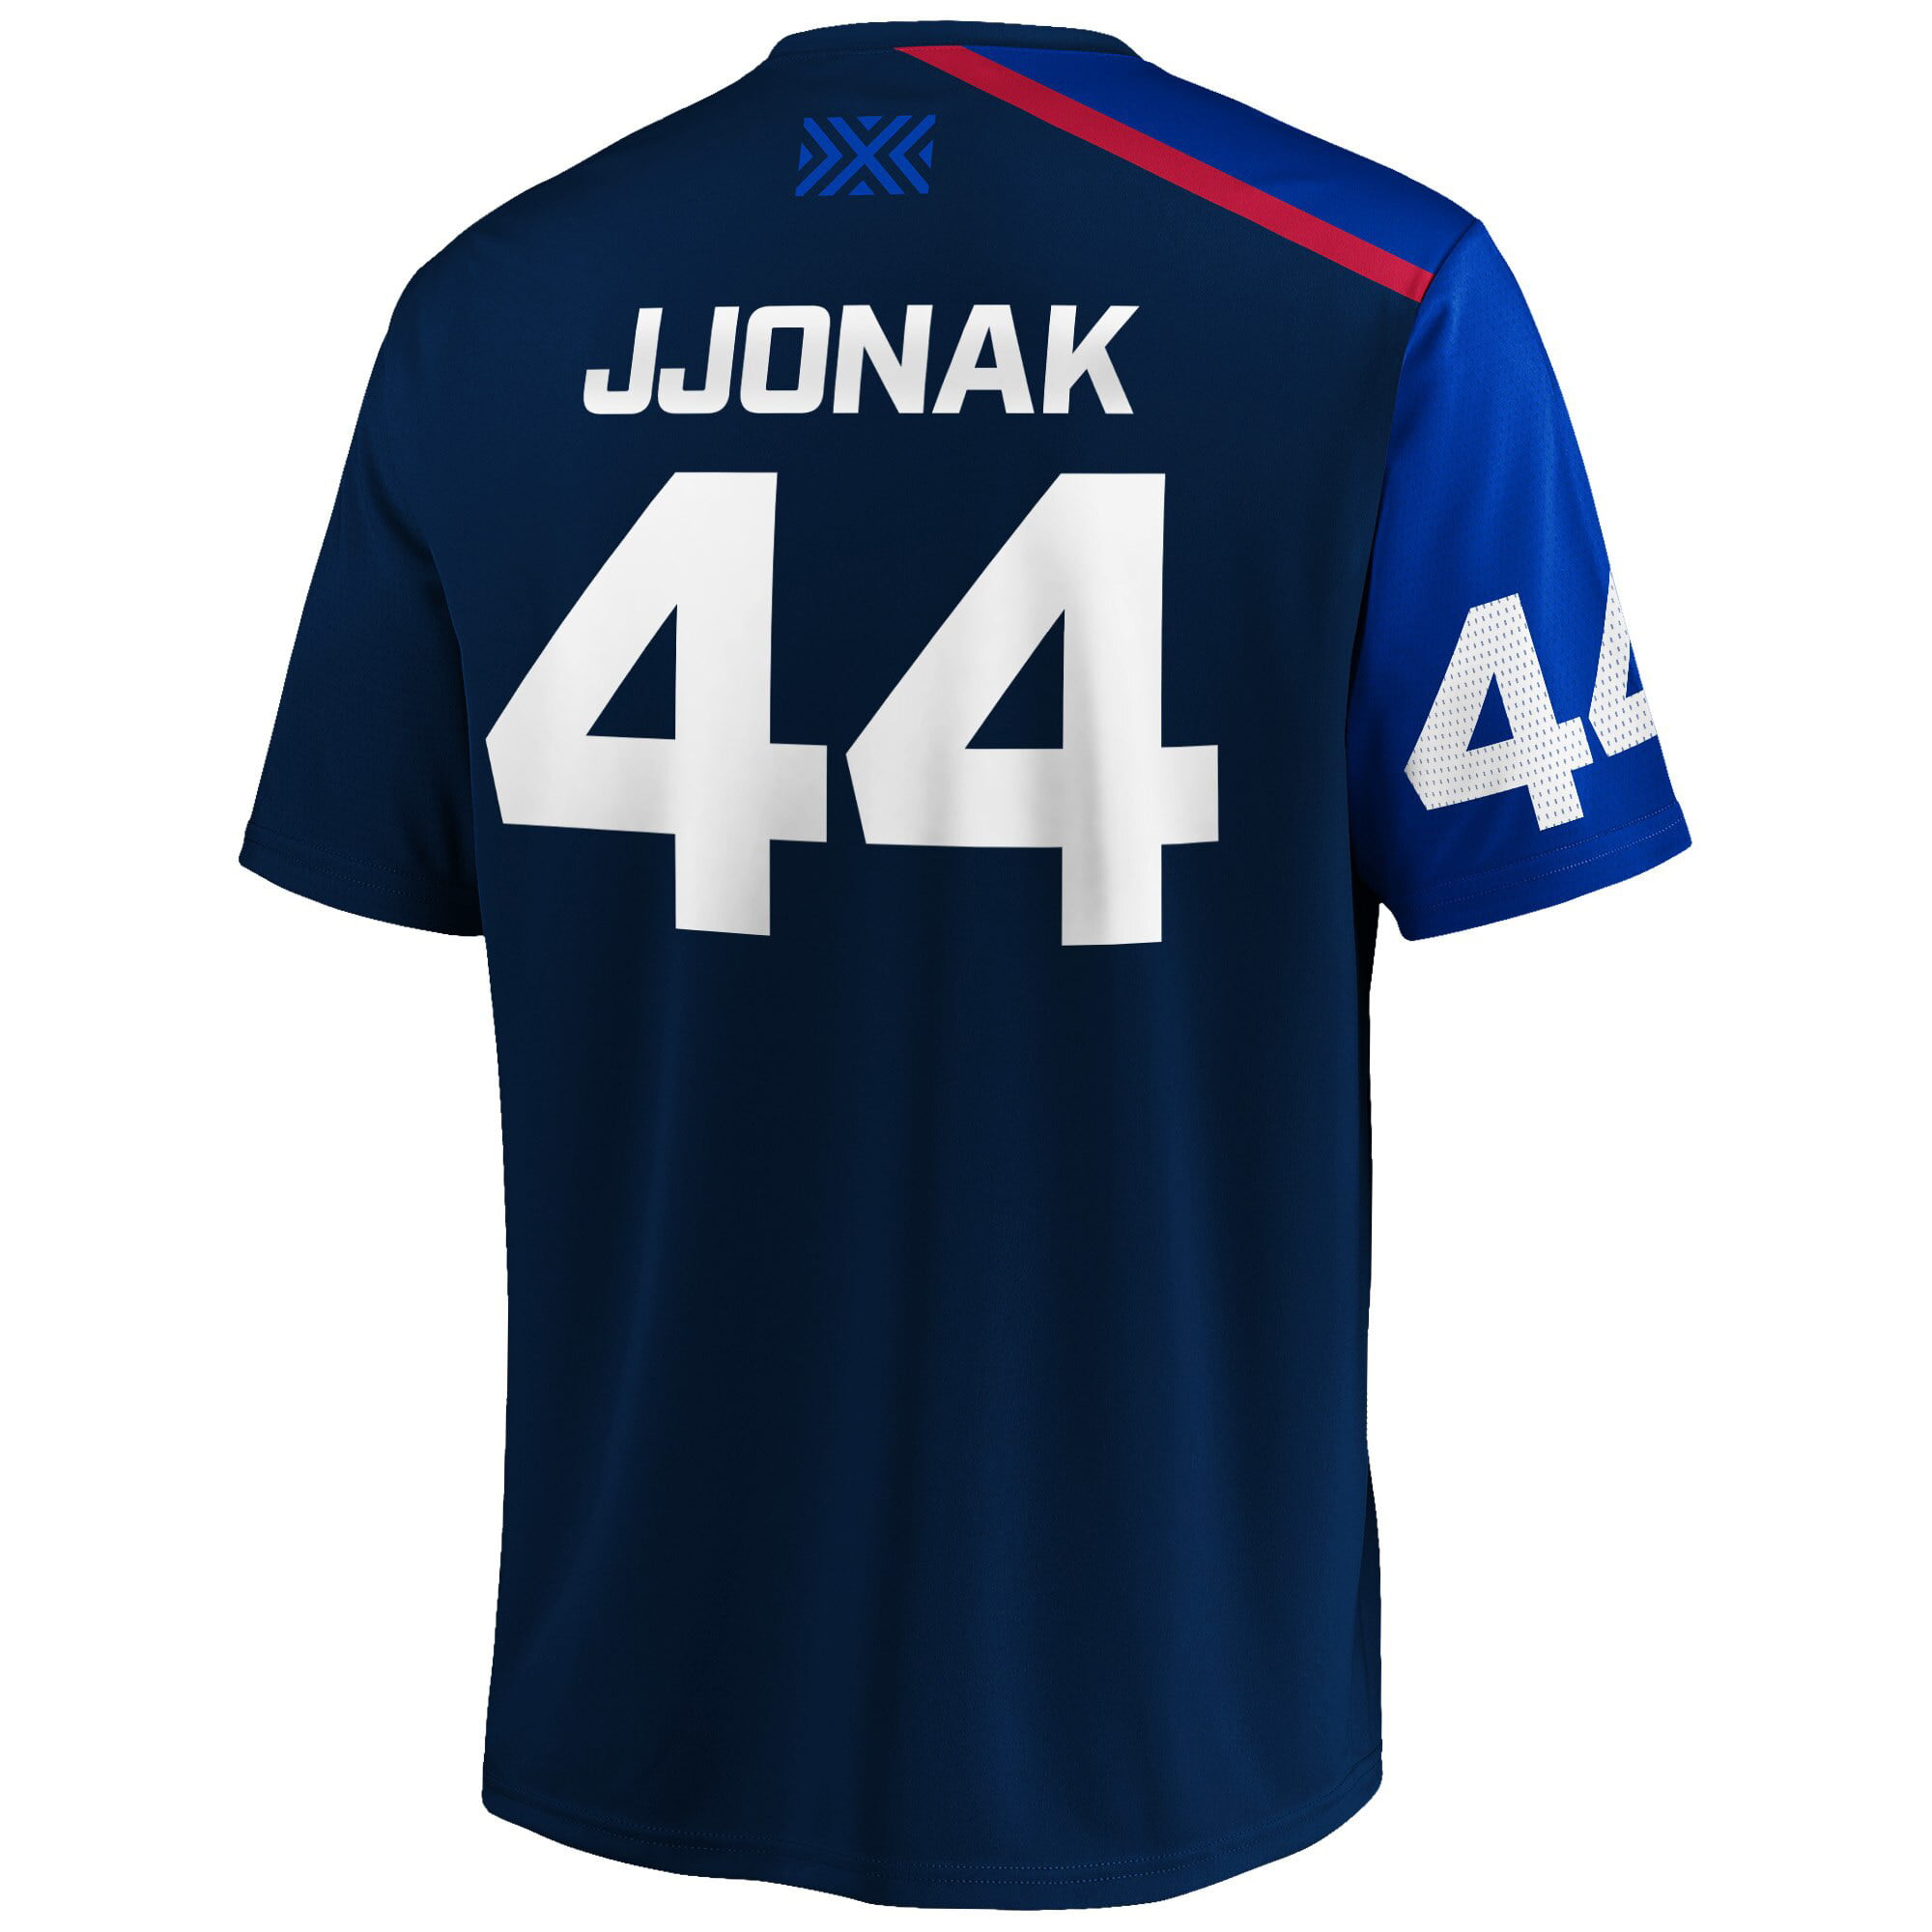 new york excelsior jersey